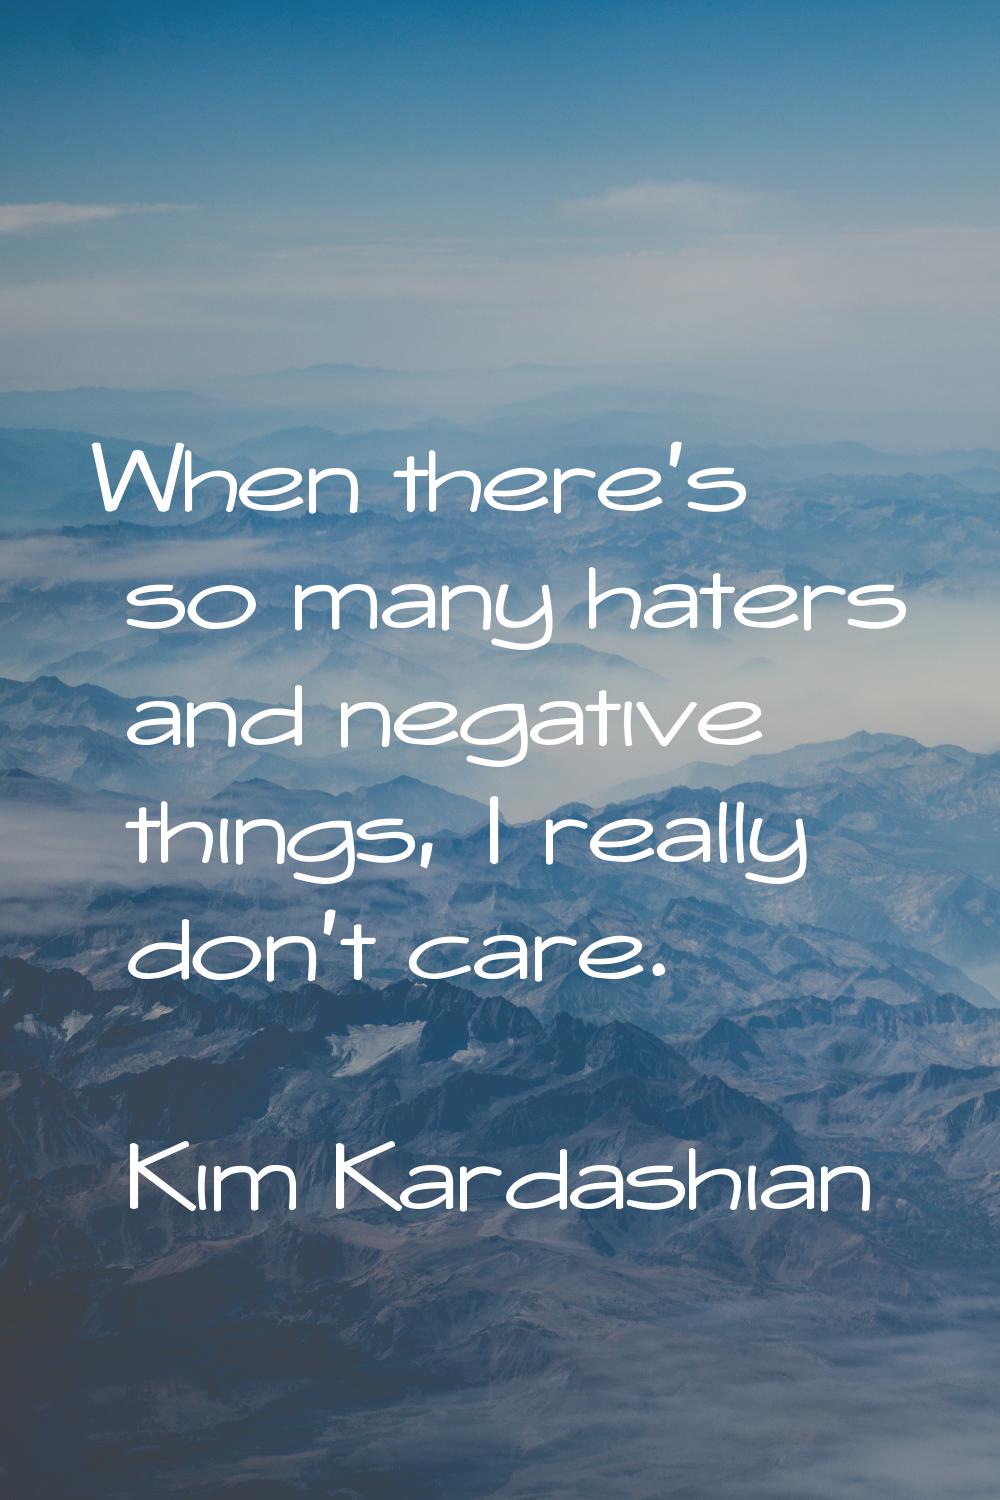 When there's so many haters and negative things, I really don't care.